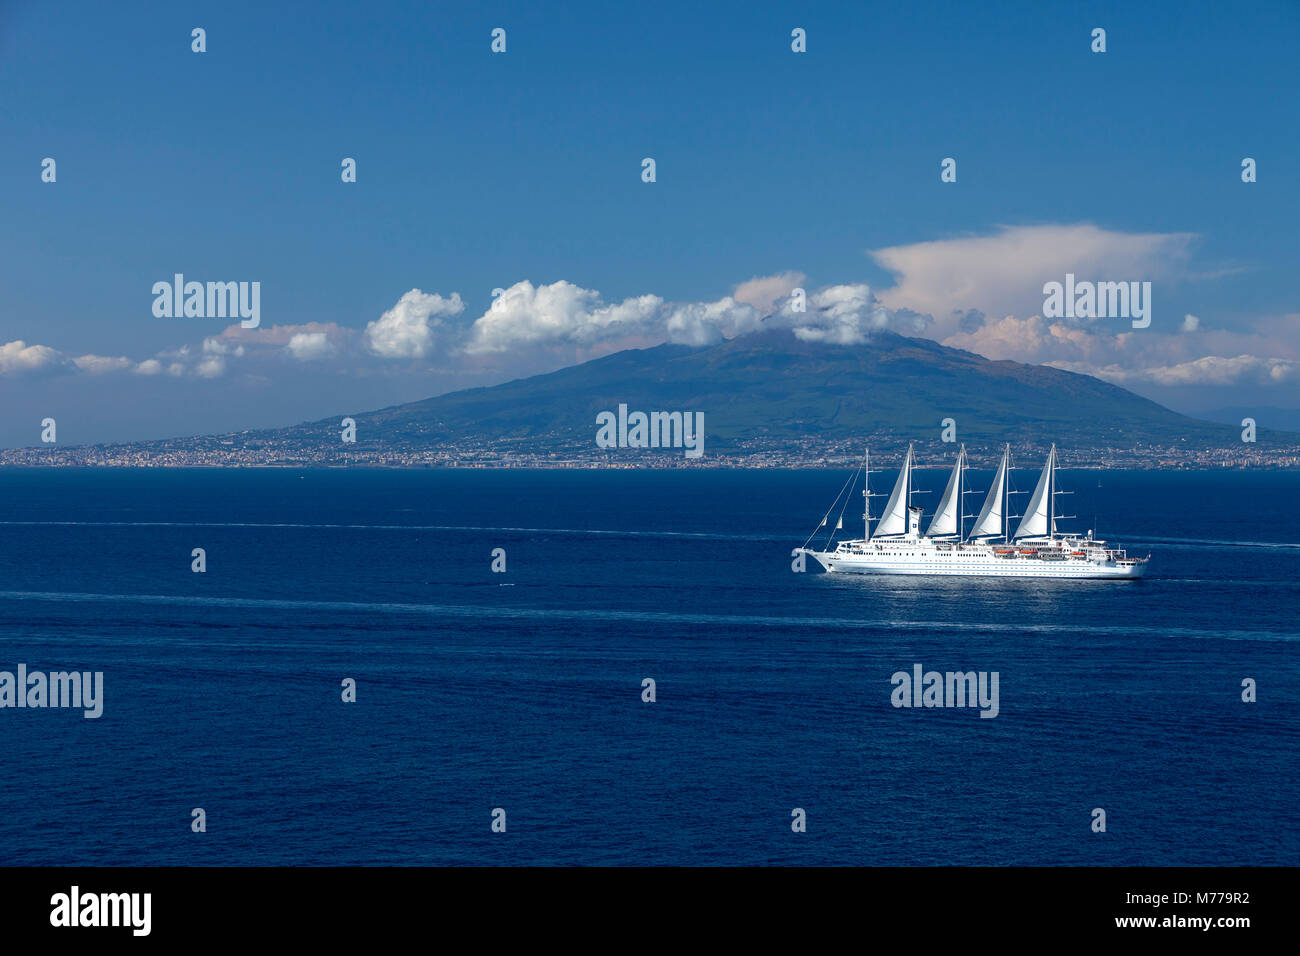 Mount Vesuvius from across the Bay of Naples with Wind Surf cruise ship in foreground, Campania, Italy, Europe Stock Photo